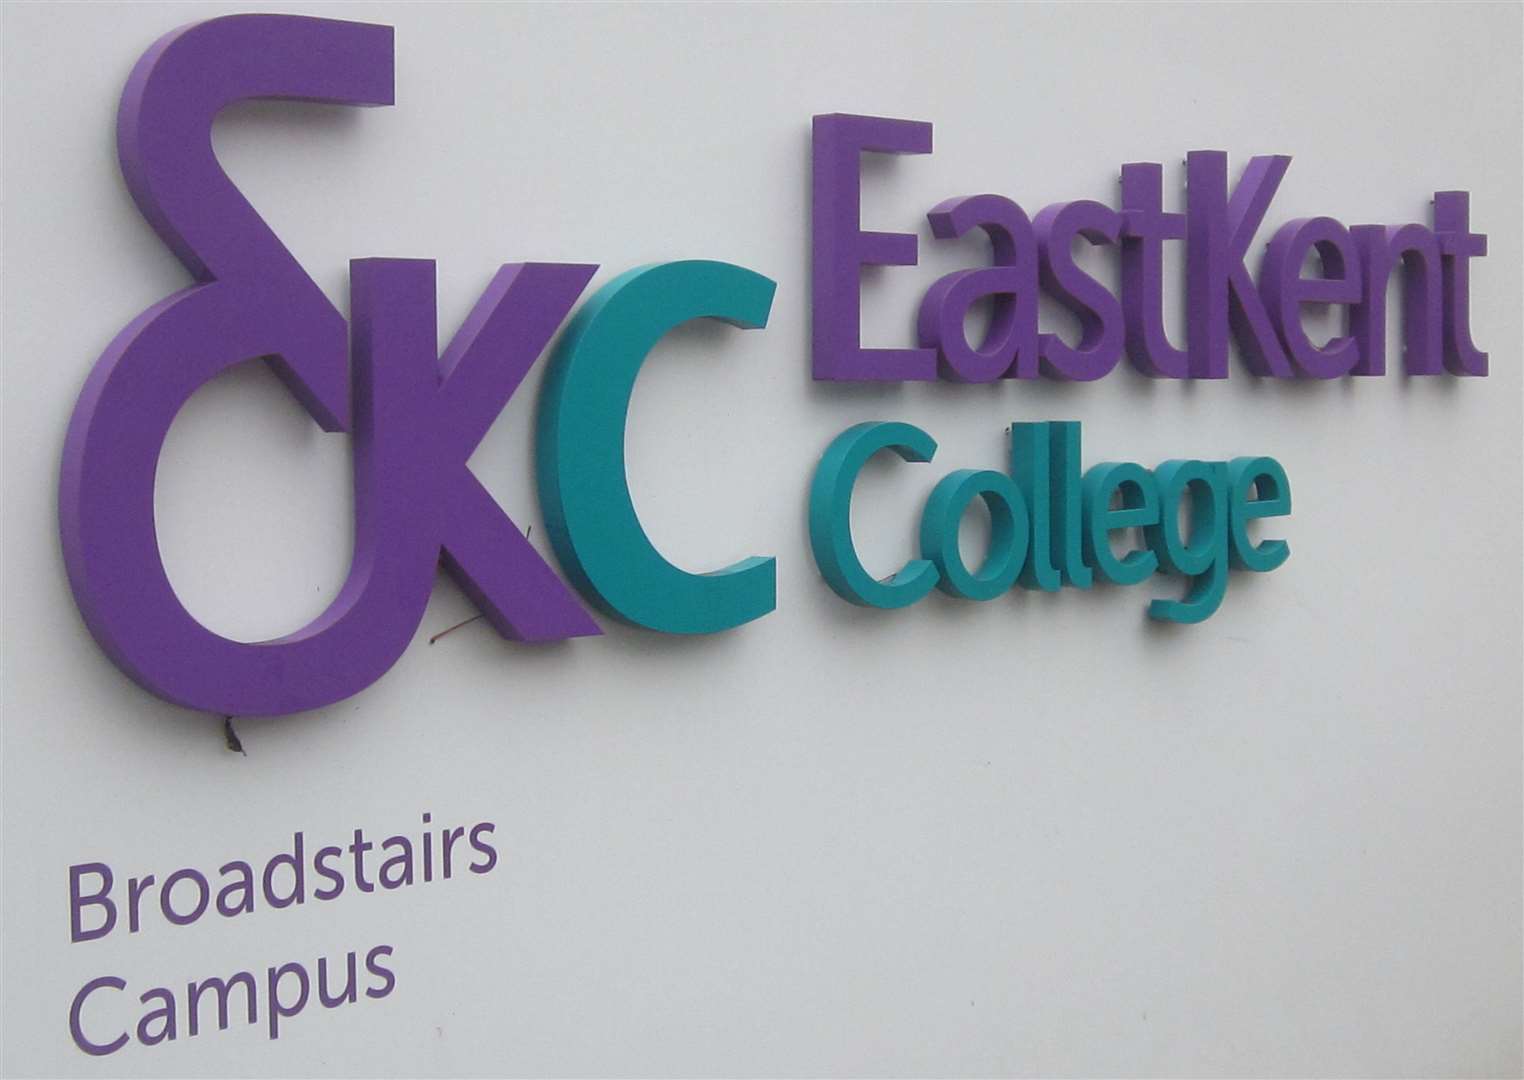 East Kent College Group started out from humble beginnings